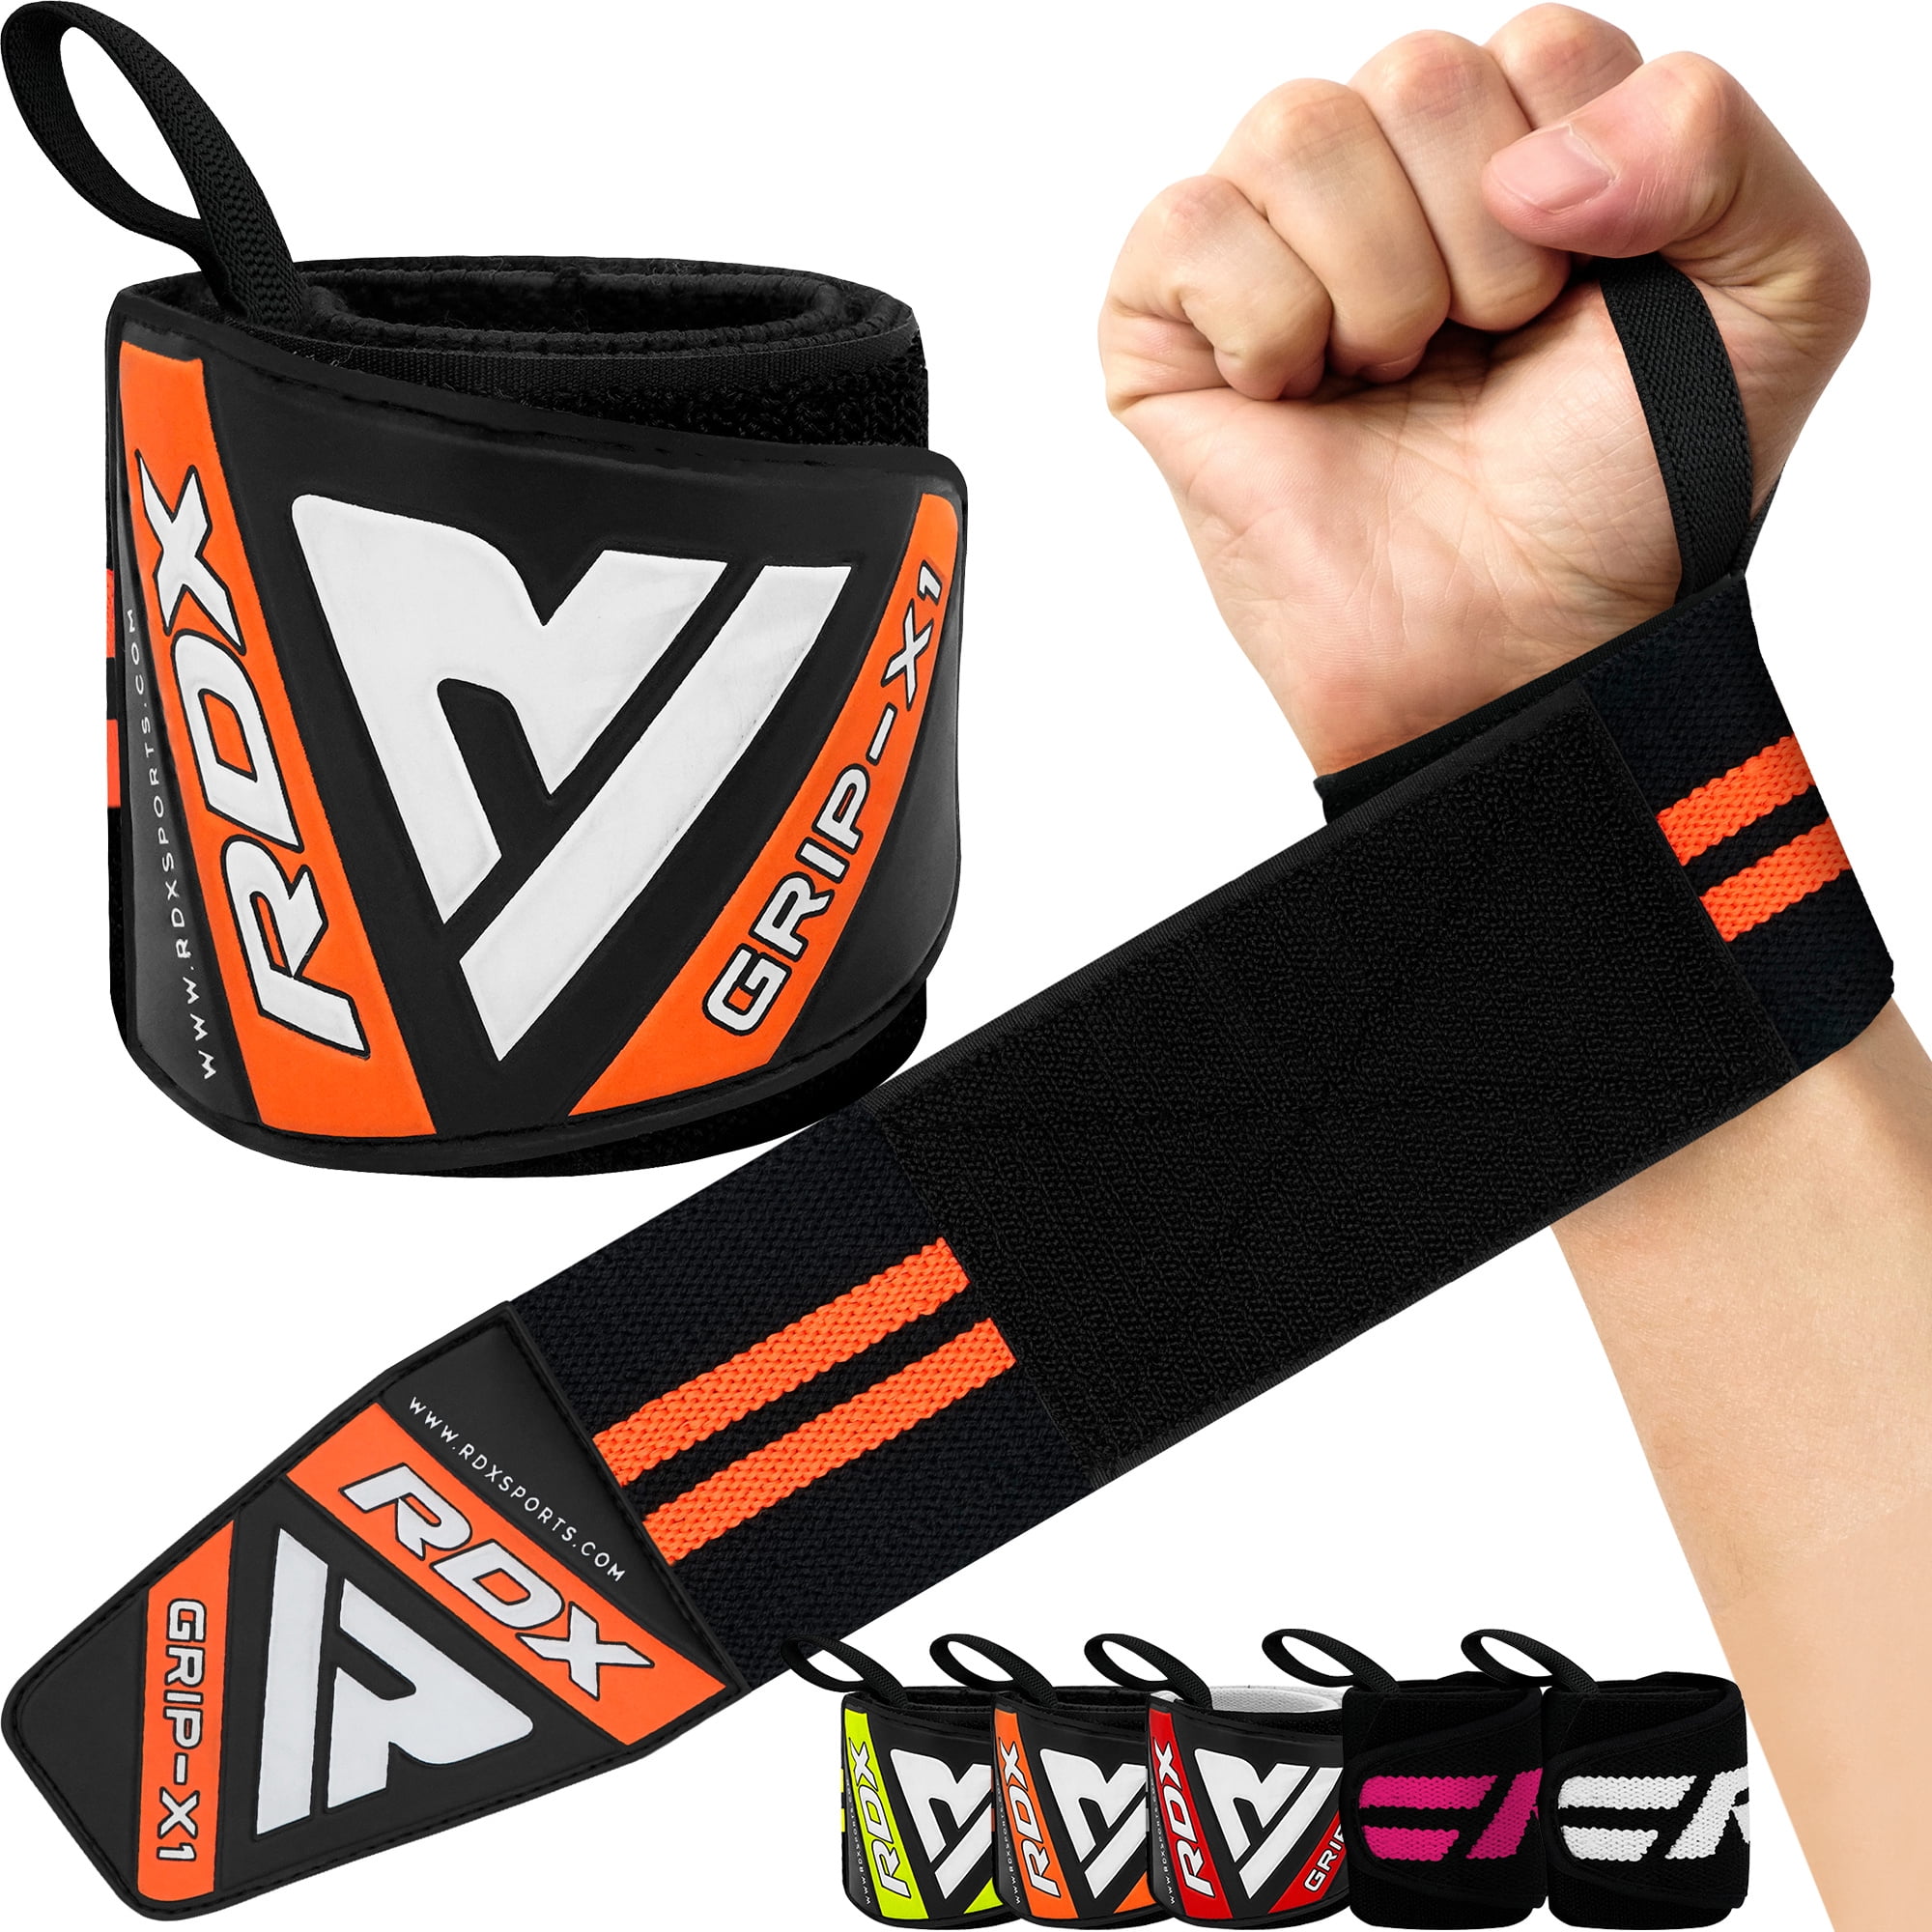 RDX Weight Lifting Wrist Support Wraps, IPL USPA Approved, Elasticated Pro  18” Cotton Straps, Thumb Loop, Powerlifting Bodybuilding Fitness Strength  Gym Training WOD Workout, Gymnastics Calisthenics 